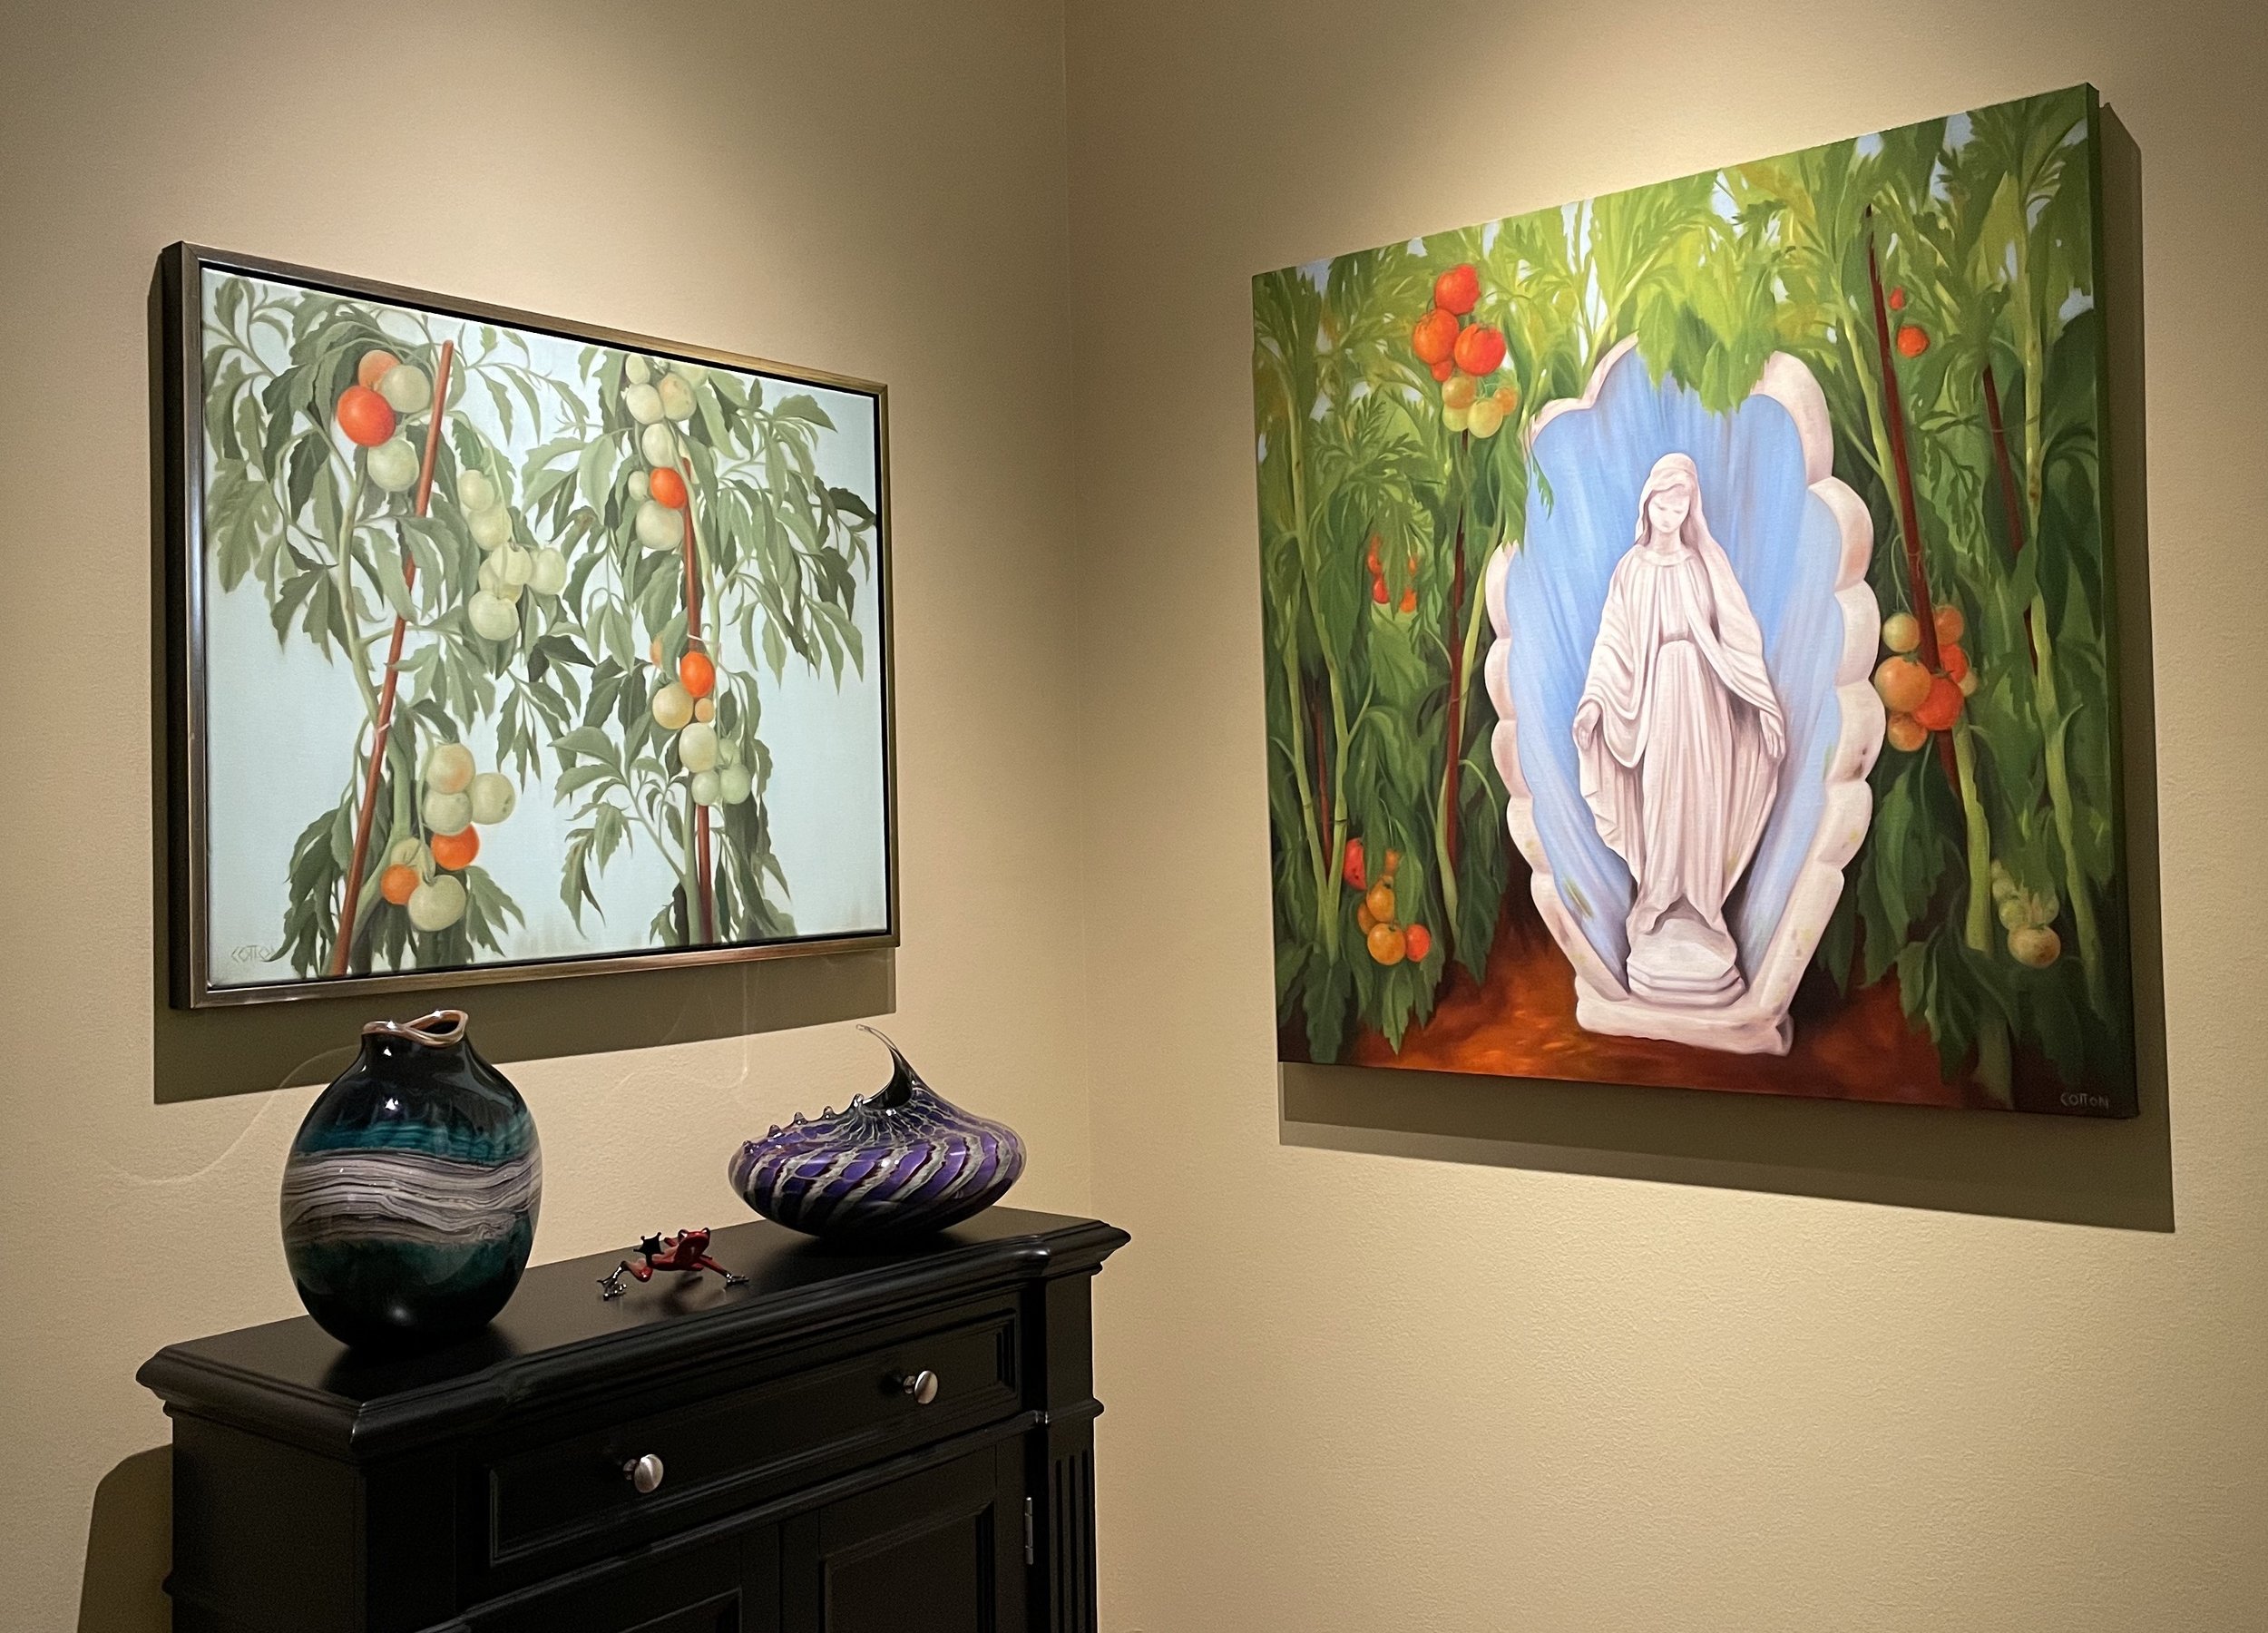     Heirloom  , 24” x 30”, oil on canvas;   Our Lady of the Creole Tomatoes  , 36” x 36”, oil on canvas – Sheila Cotton 